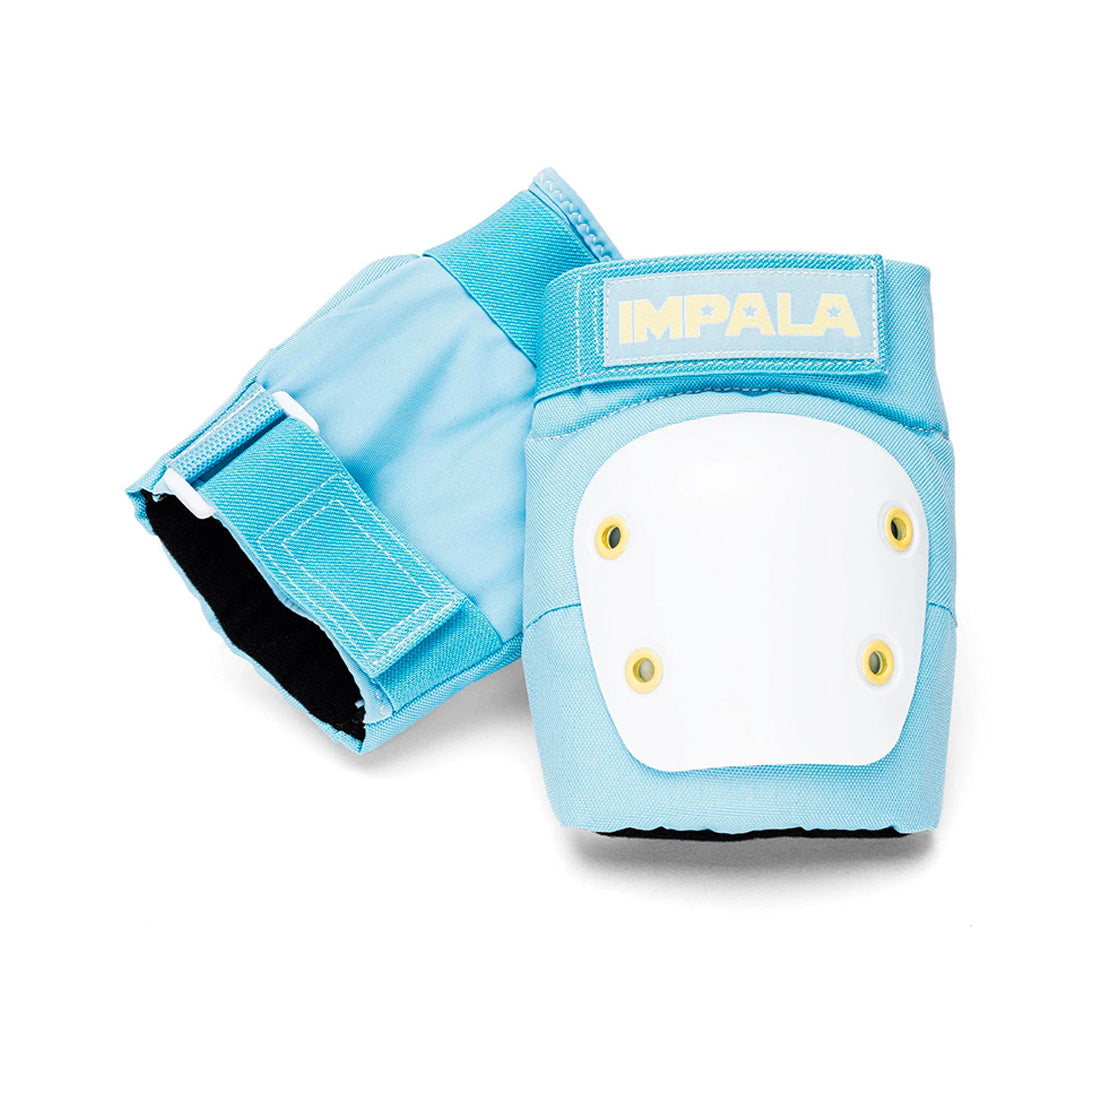 Impala Tri Pack Sky Blue/Yellow - Junior Protective Gear